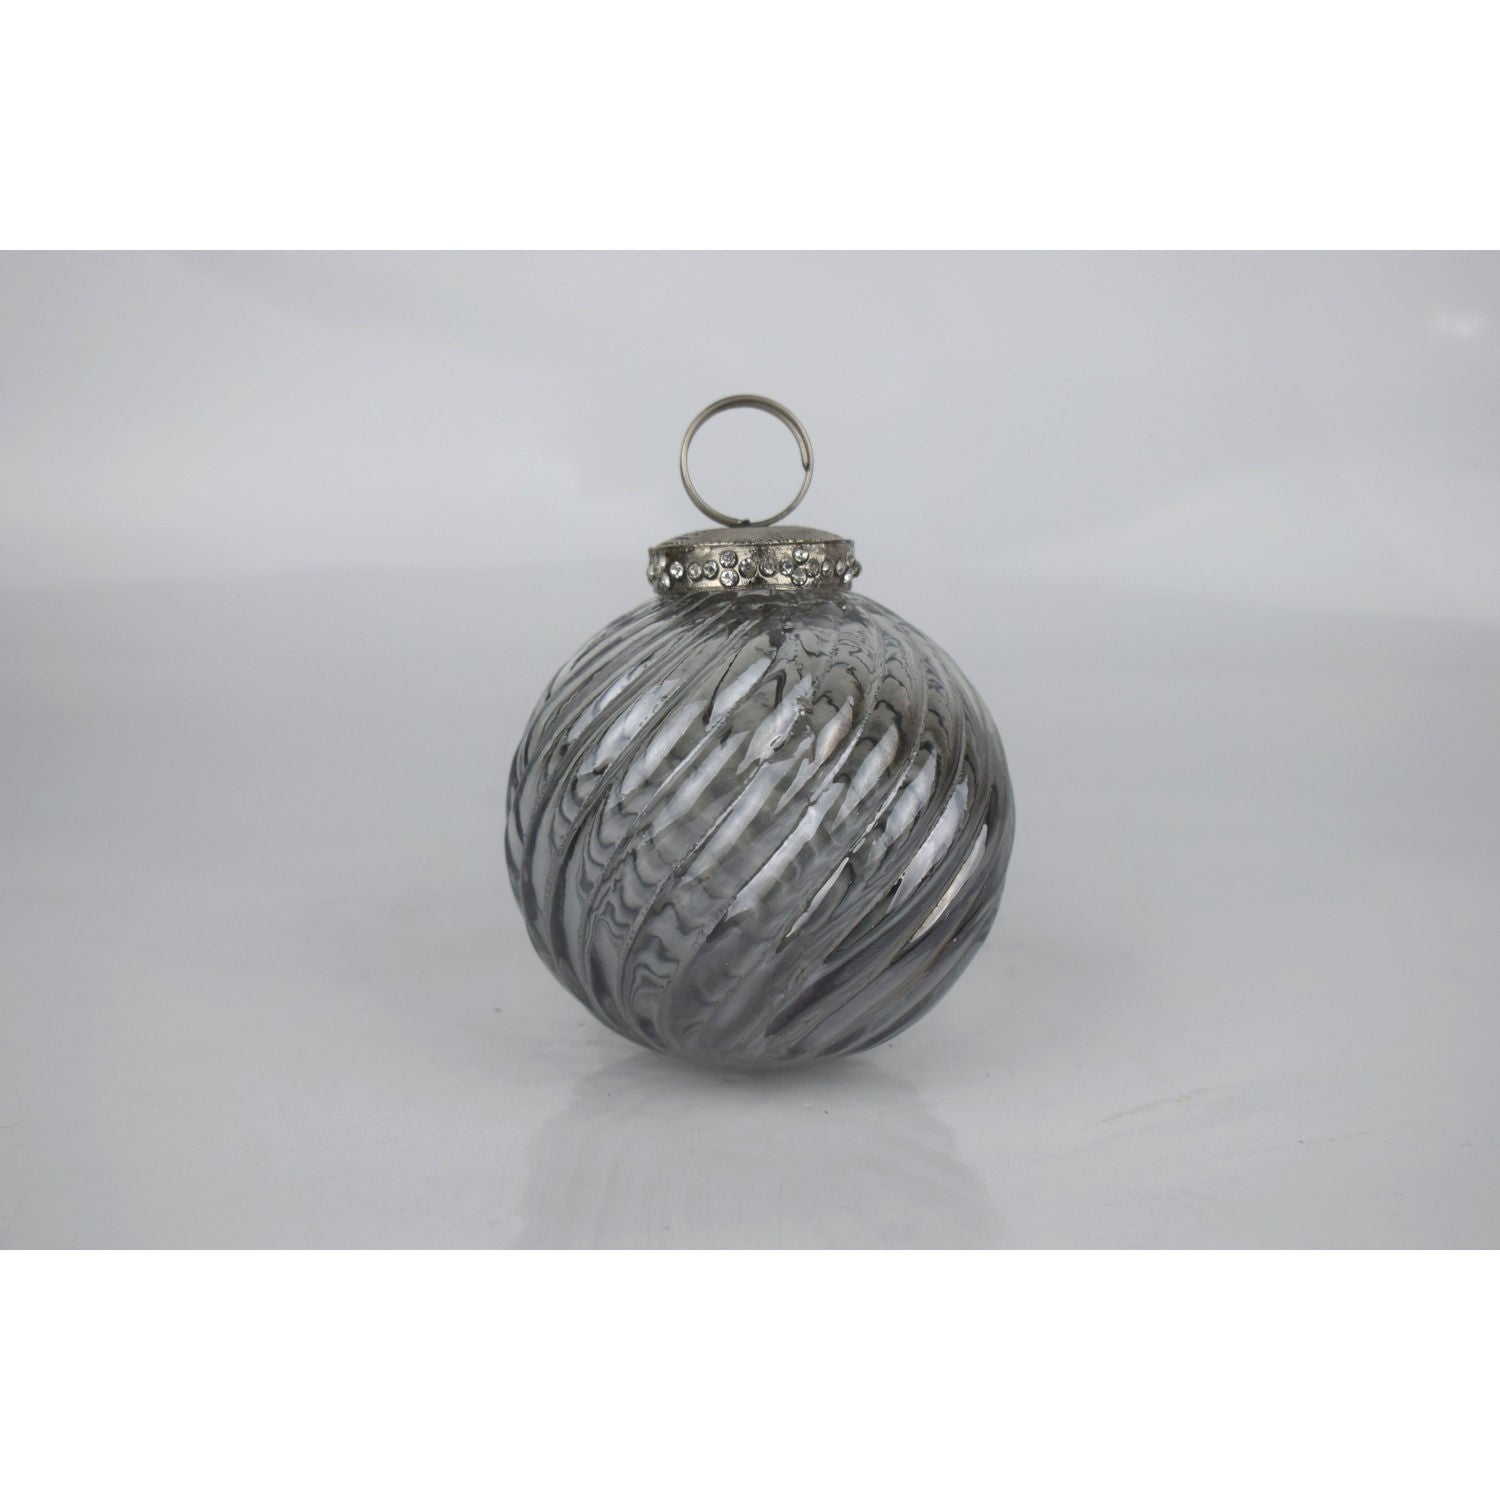 The Noel Collection Smoked Midnight Swirl Bauble